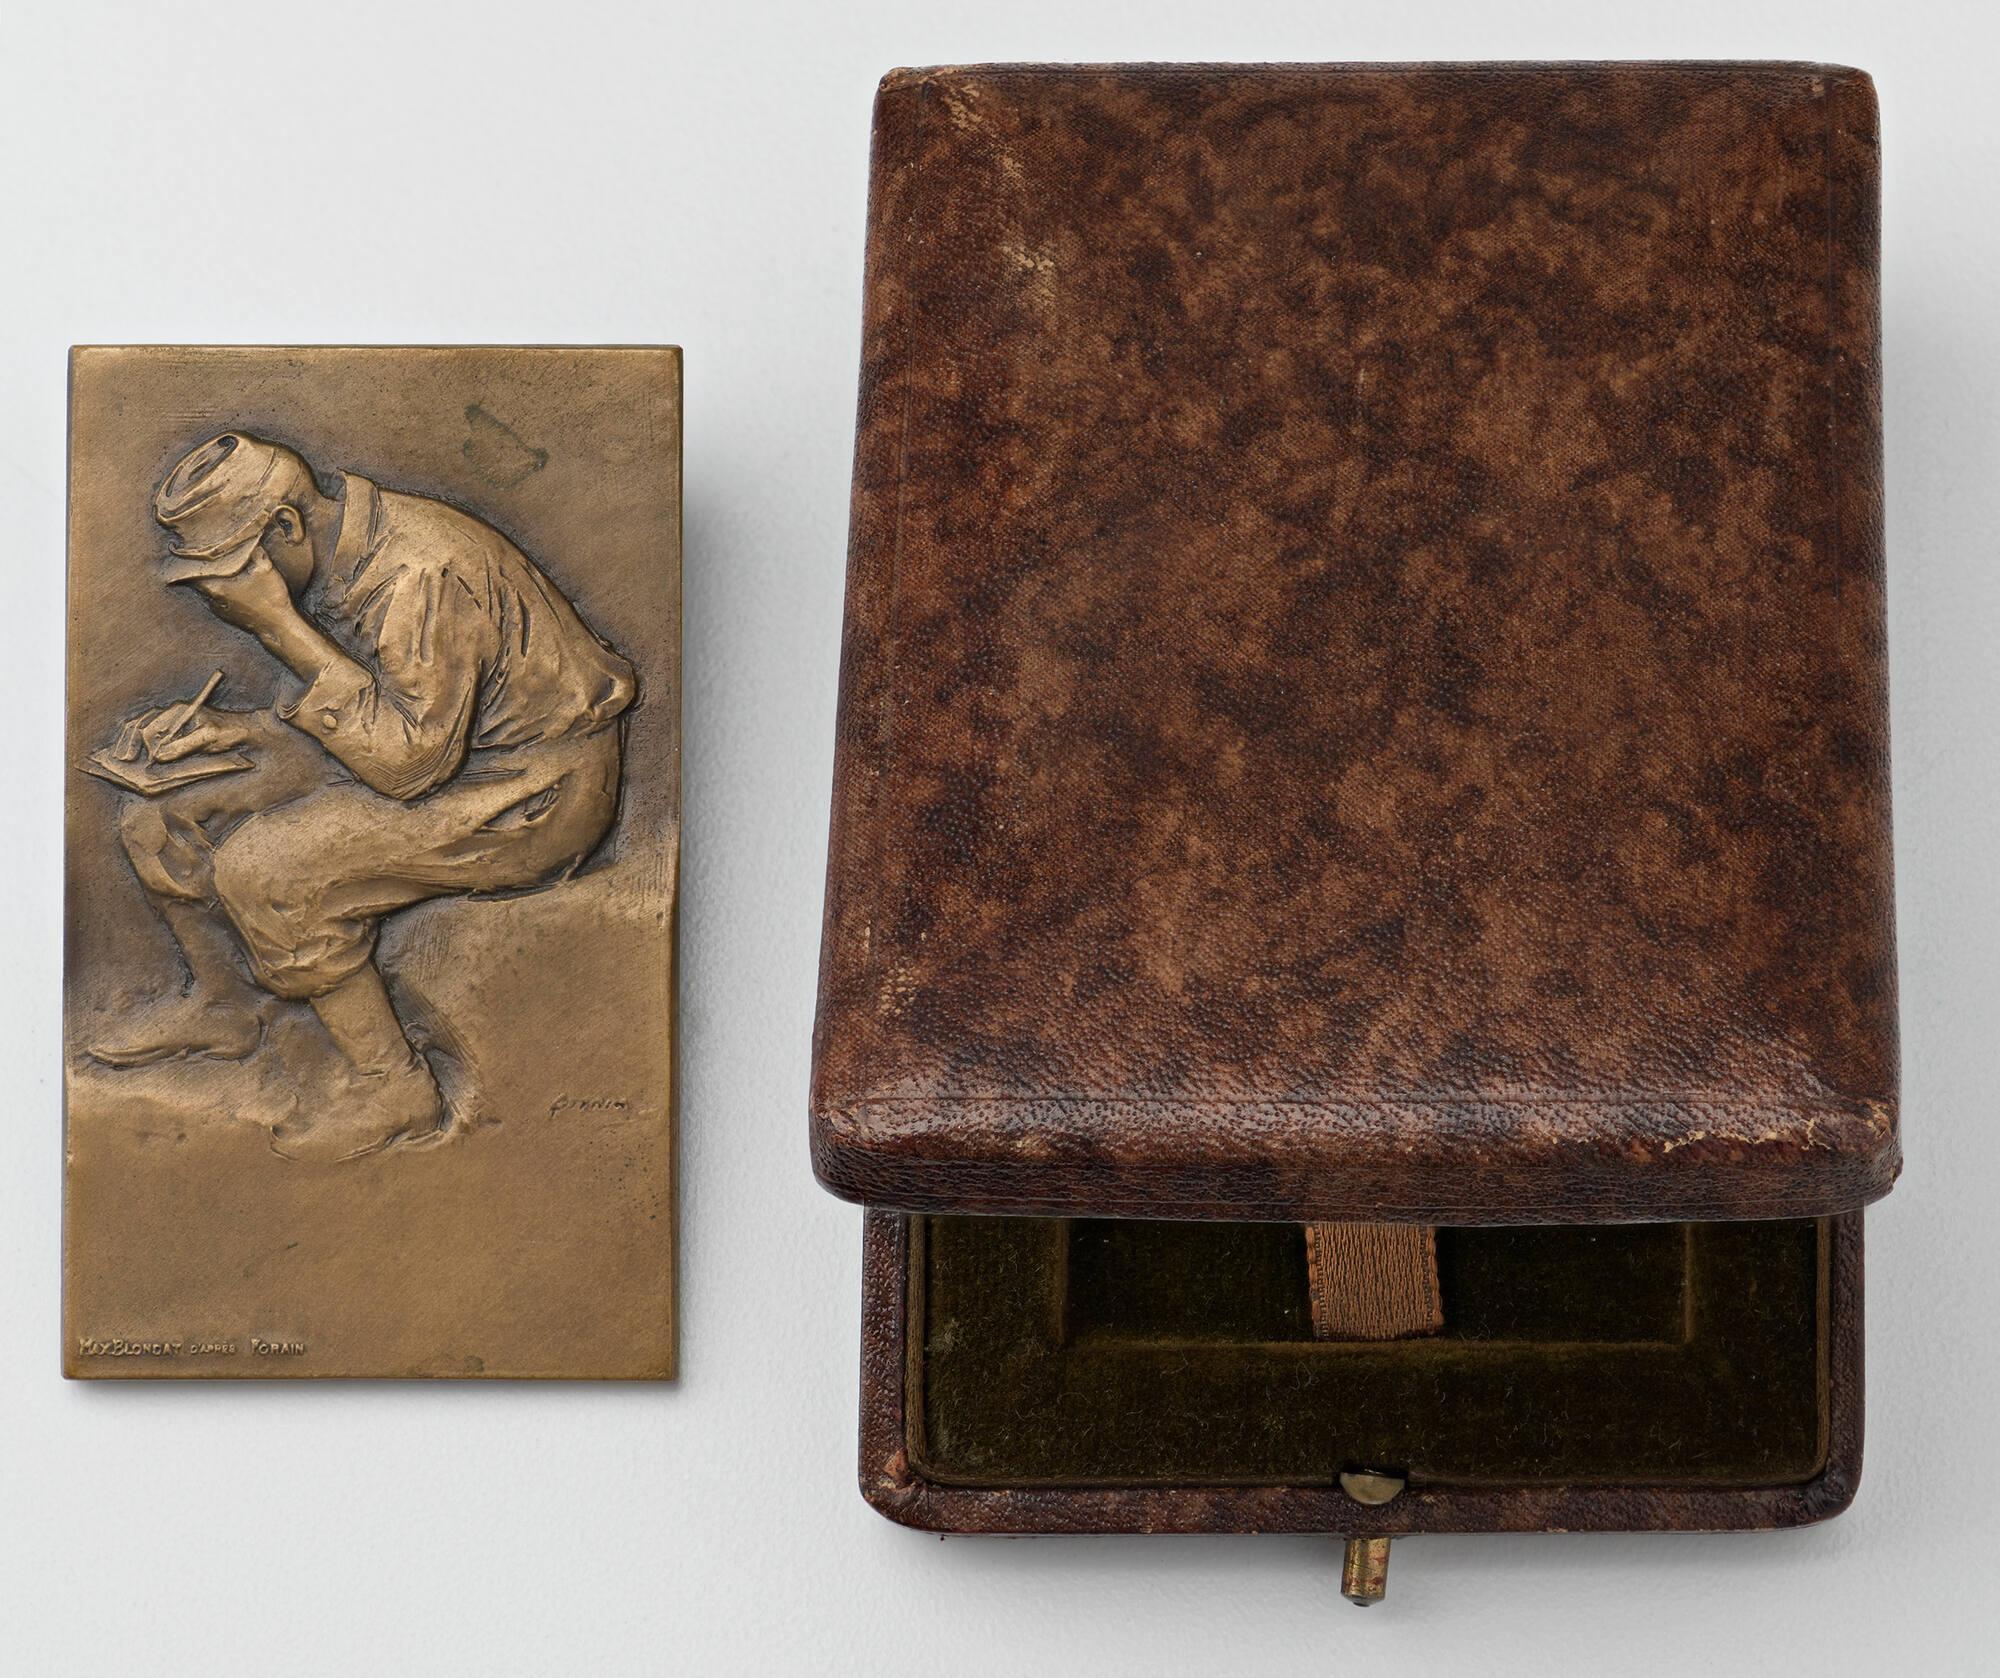 Bronze plaquette with high relief design showing a seated soldier with his head down, enclosed in a hinged leather case.